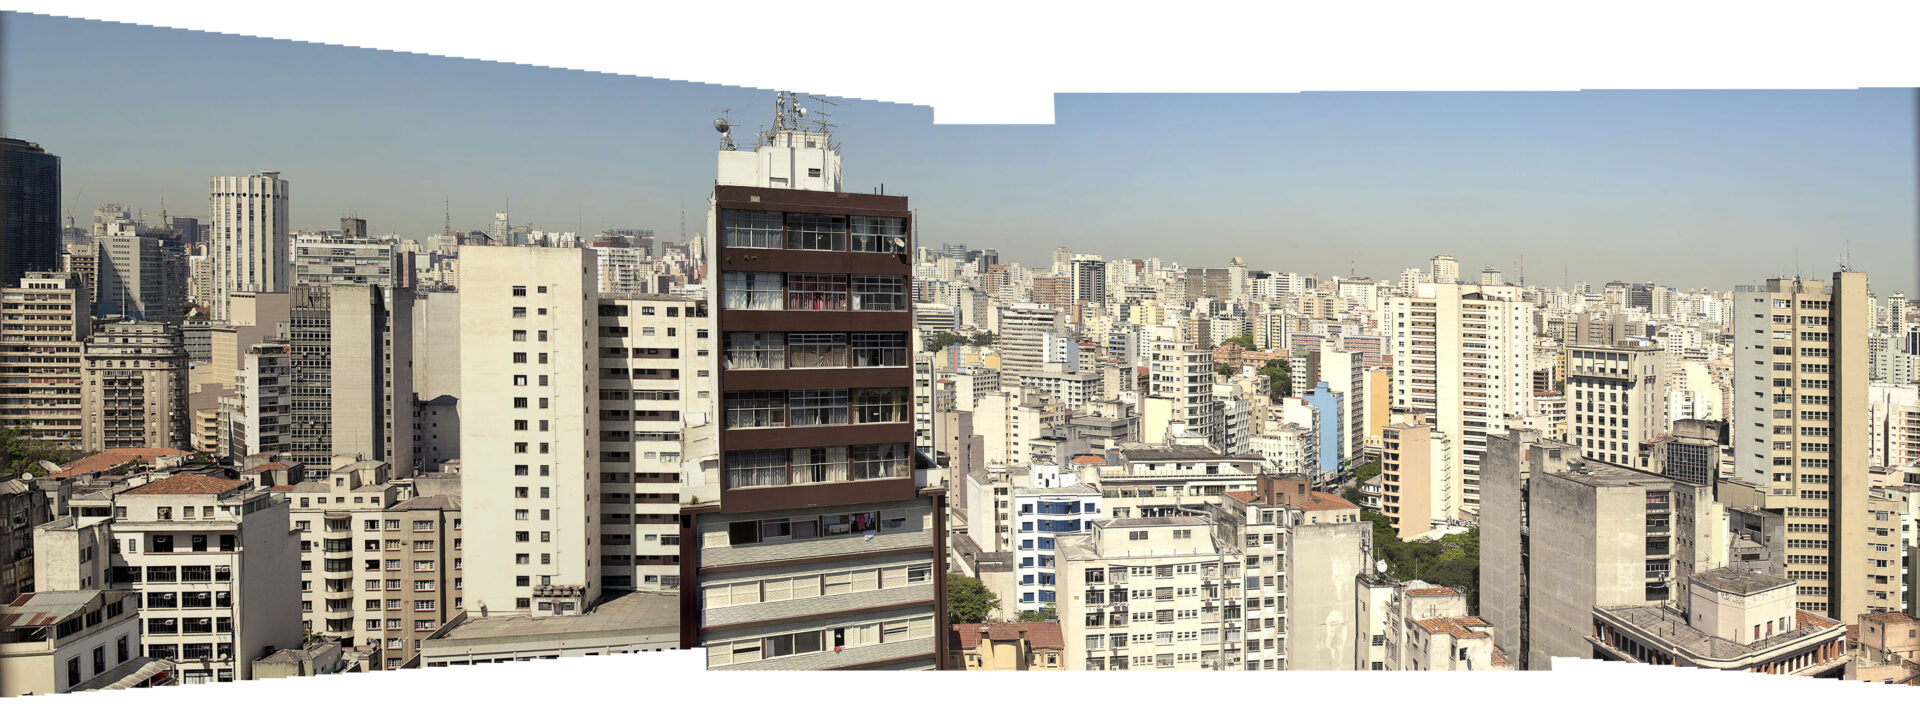 Sao Paulo, October 2014, Where dous it end?!, #92837